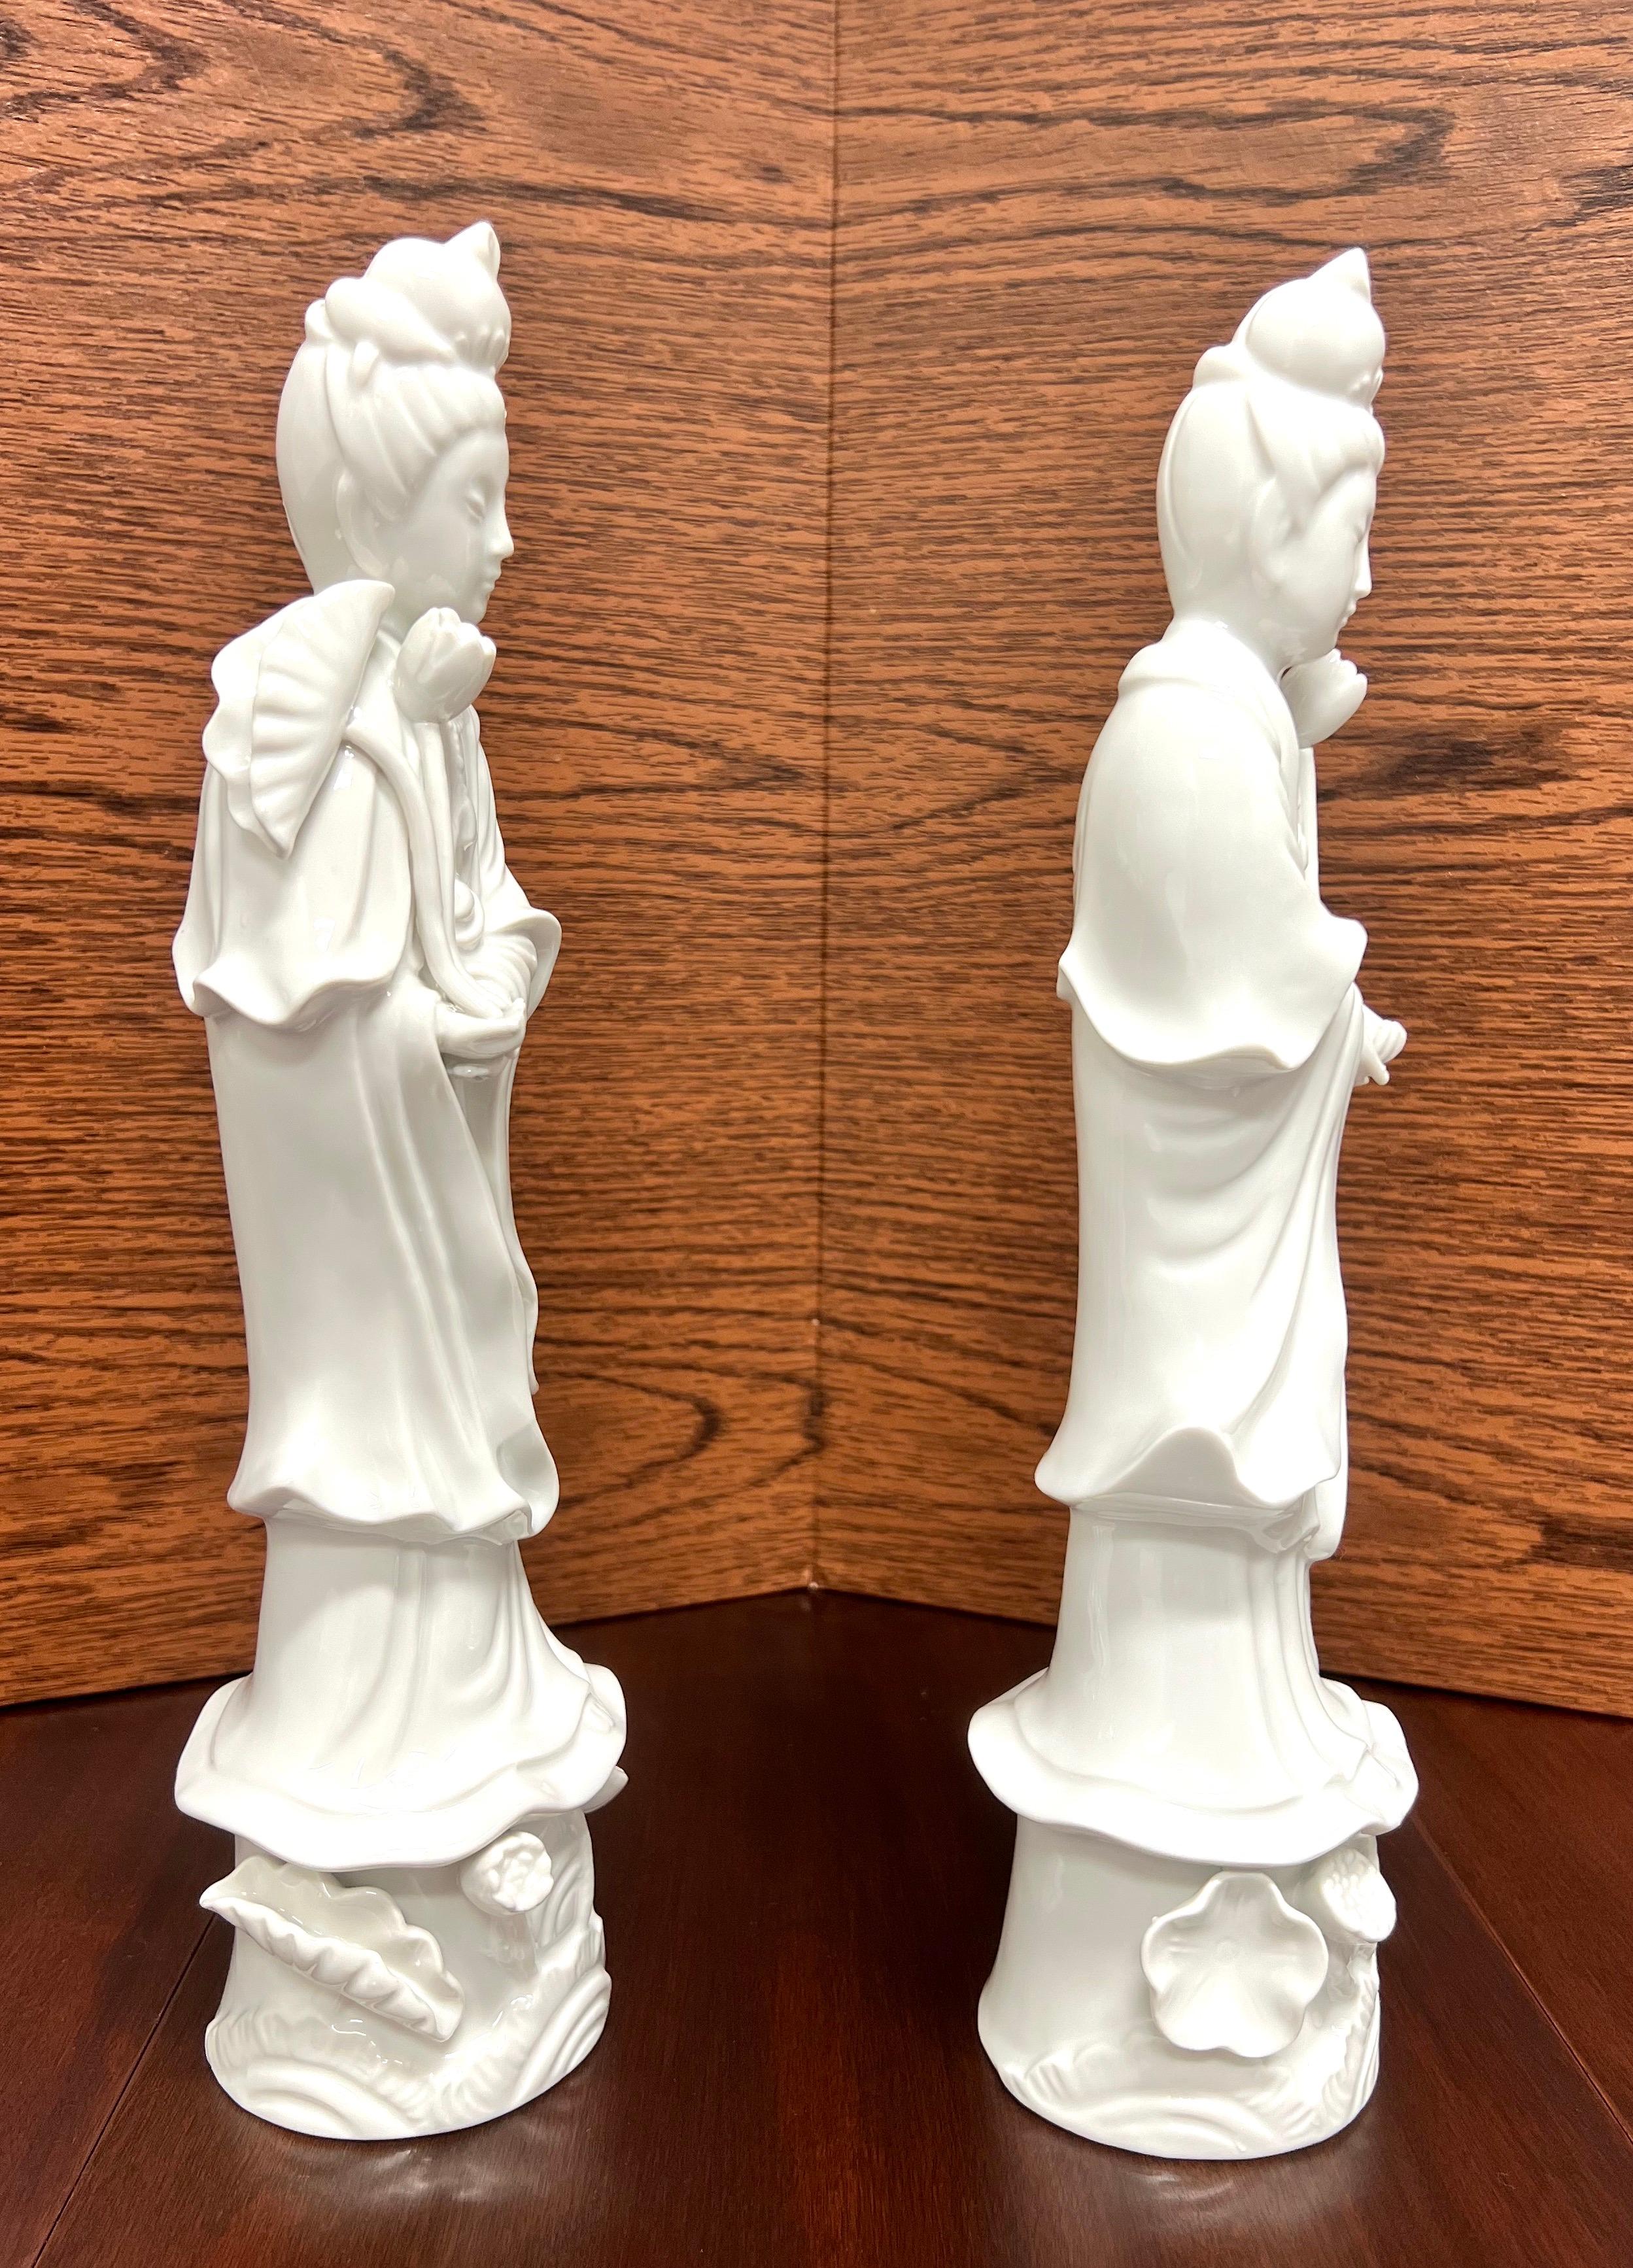 A pair of Asian Chinese Quan Yin Goddess of Mercy figurines by Andrea by Sadek. Hand painted, white in color glazed porcelain. Made in Japan, in the late 20th Century.

Measures:  Each: 4w 4d 14.5h, Weighs Approximately: 1 lb Each

Outstanding